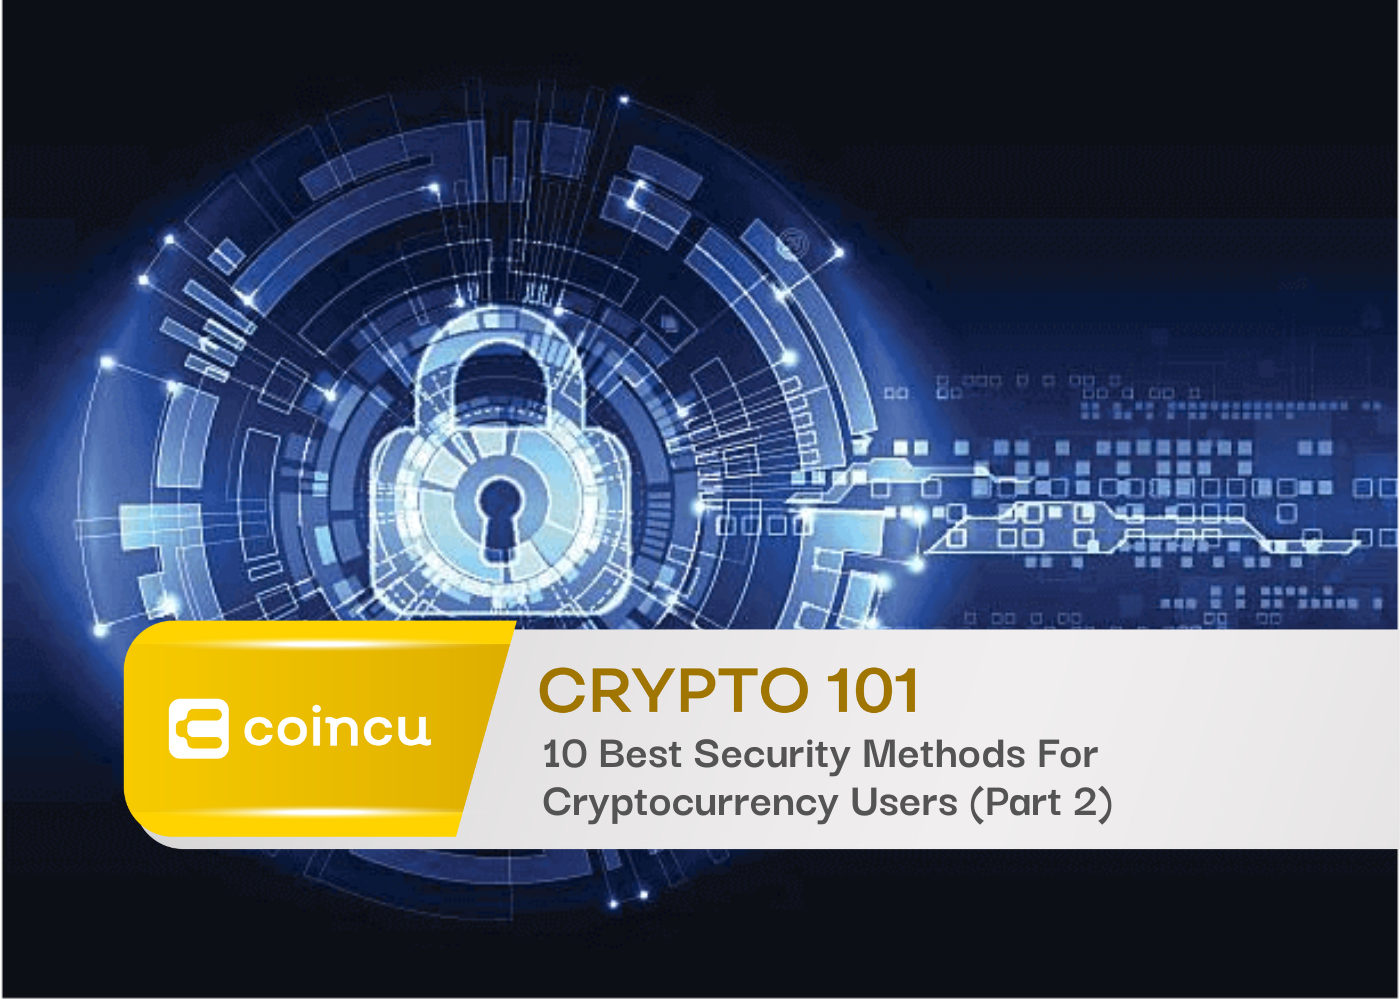 Crypto 101: 10 Best Security Methods For Cryptocurrency Users (Part 2)